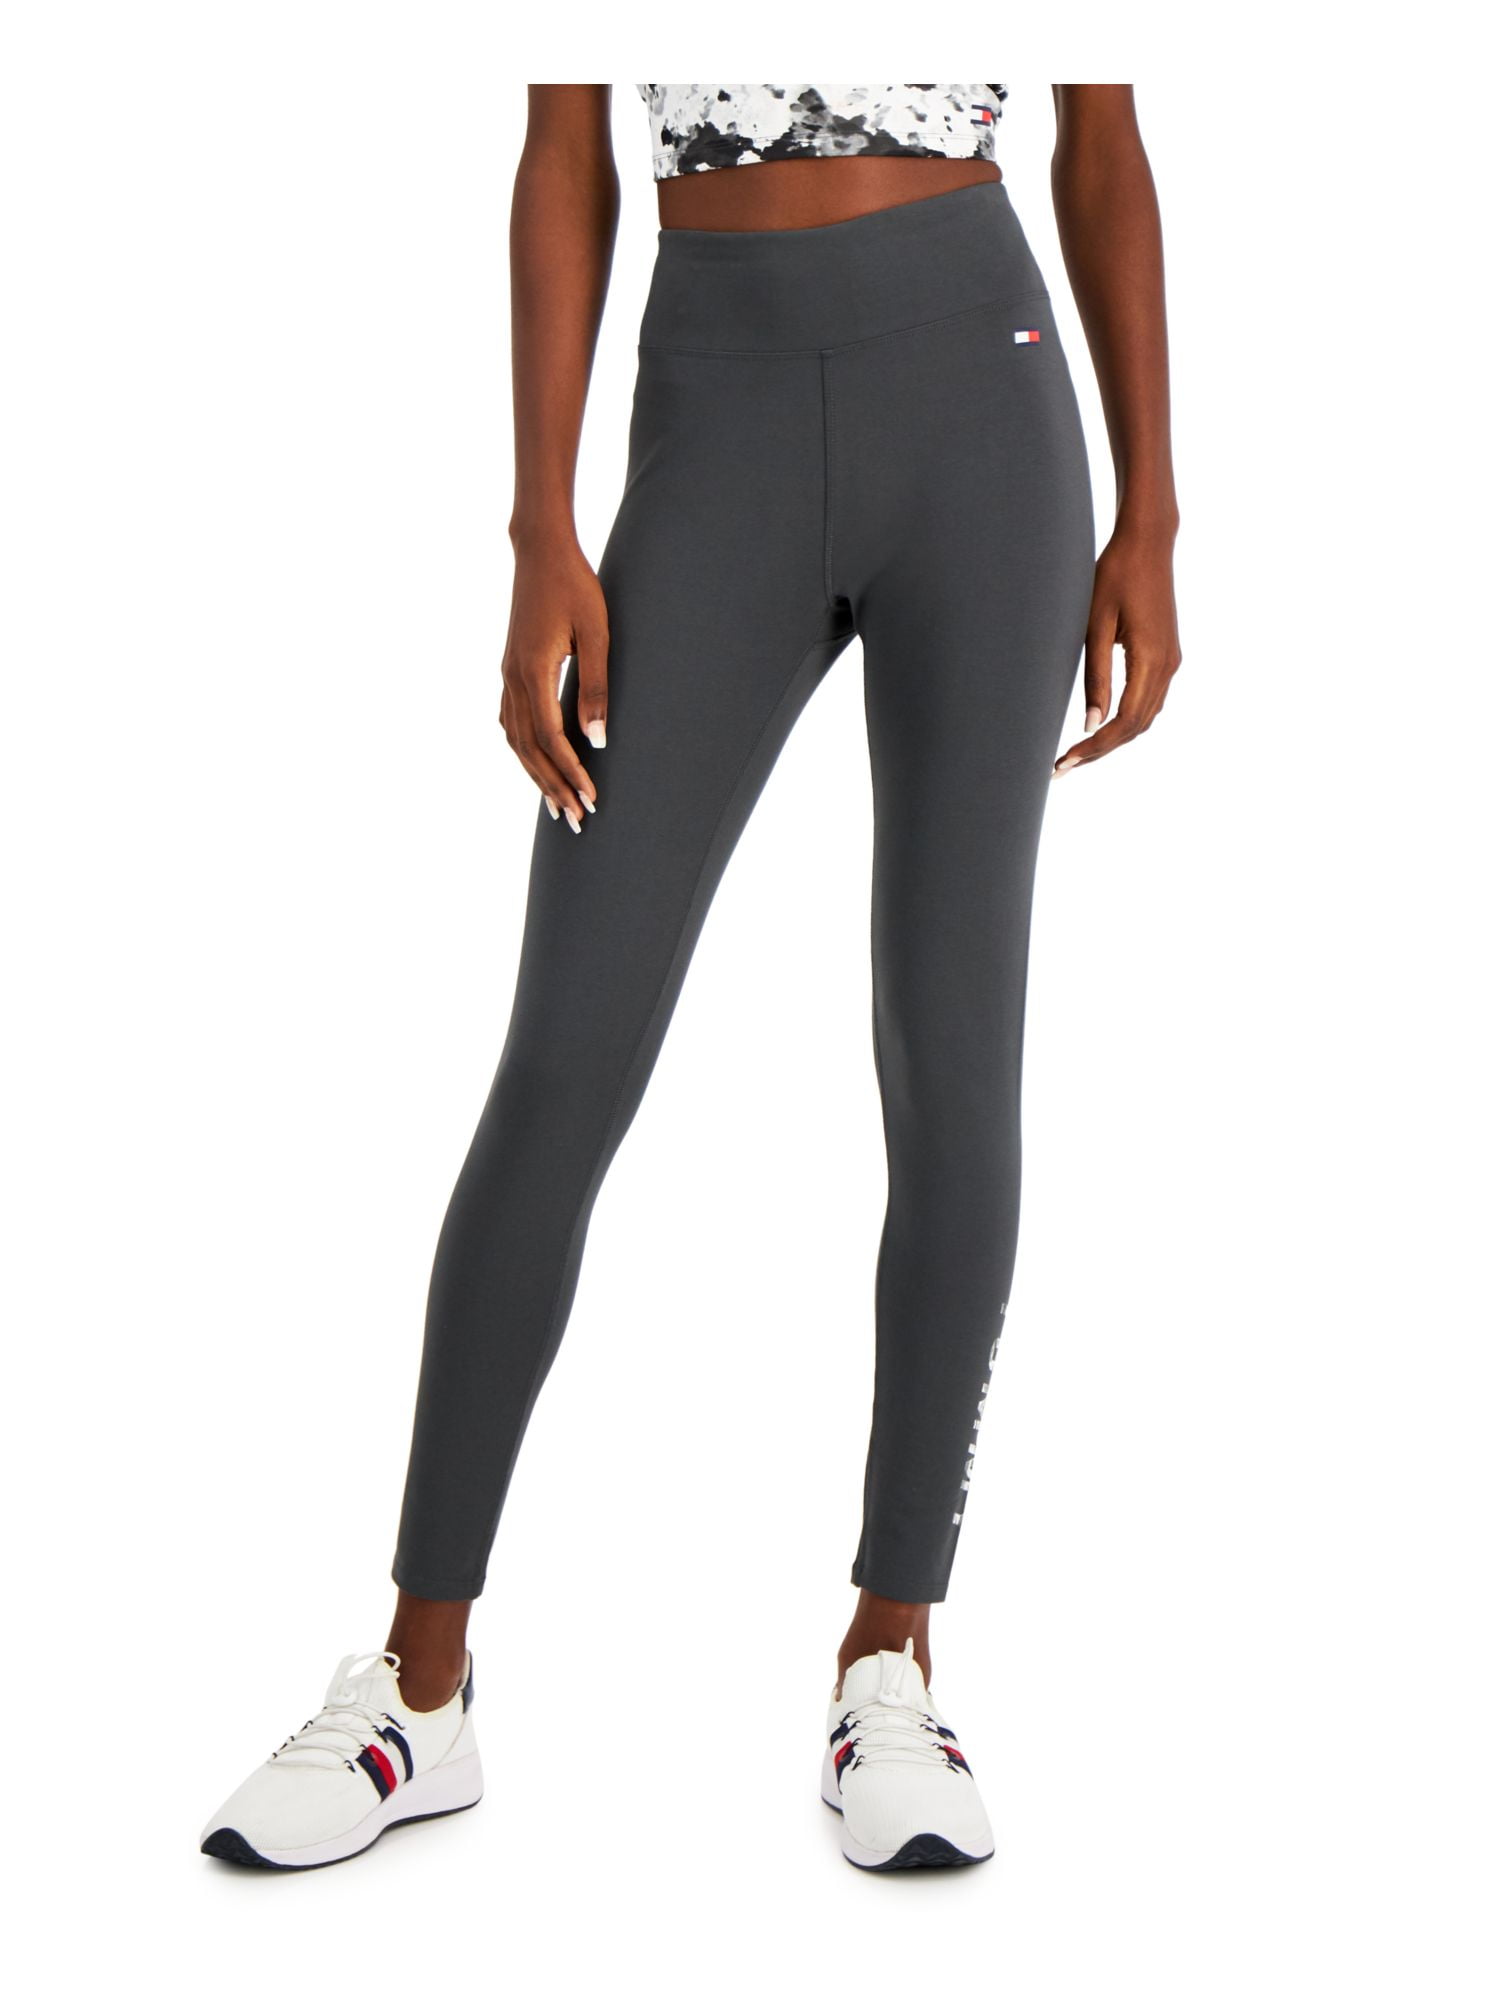 TOMMY HILFIGER SPORT Womens Gray Stretch Pocketed Jersey Full Length Active  Wear High Waist Leggings XS 